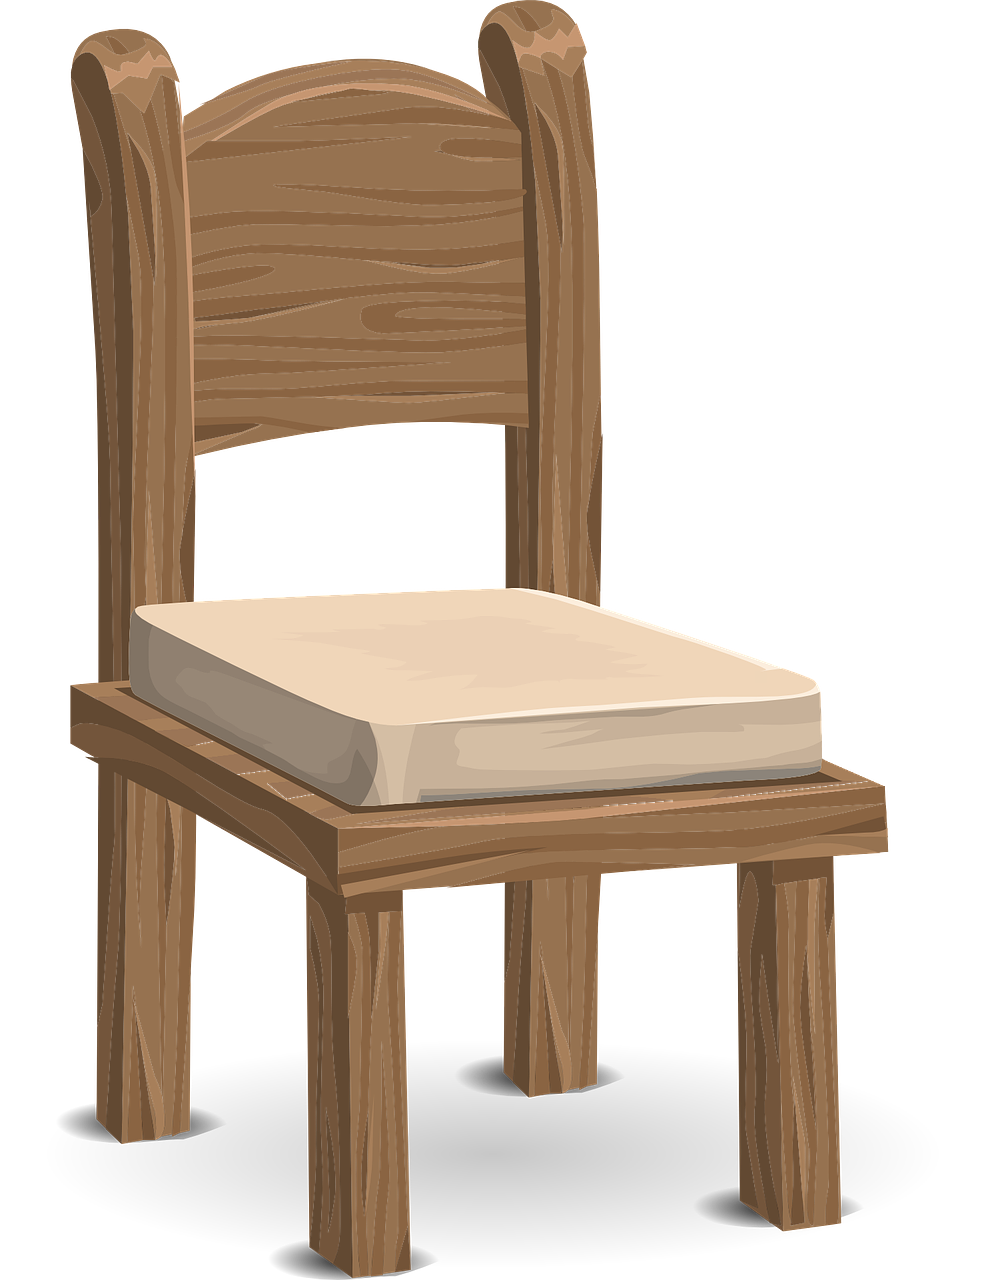 wooden chairs furniture free photo